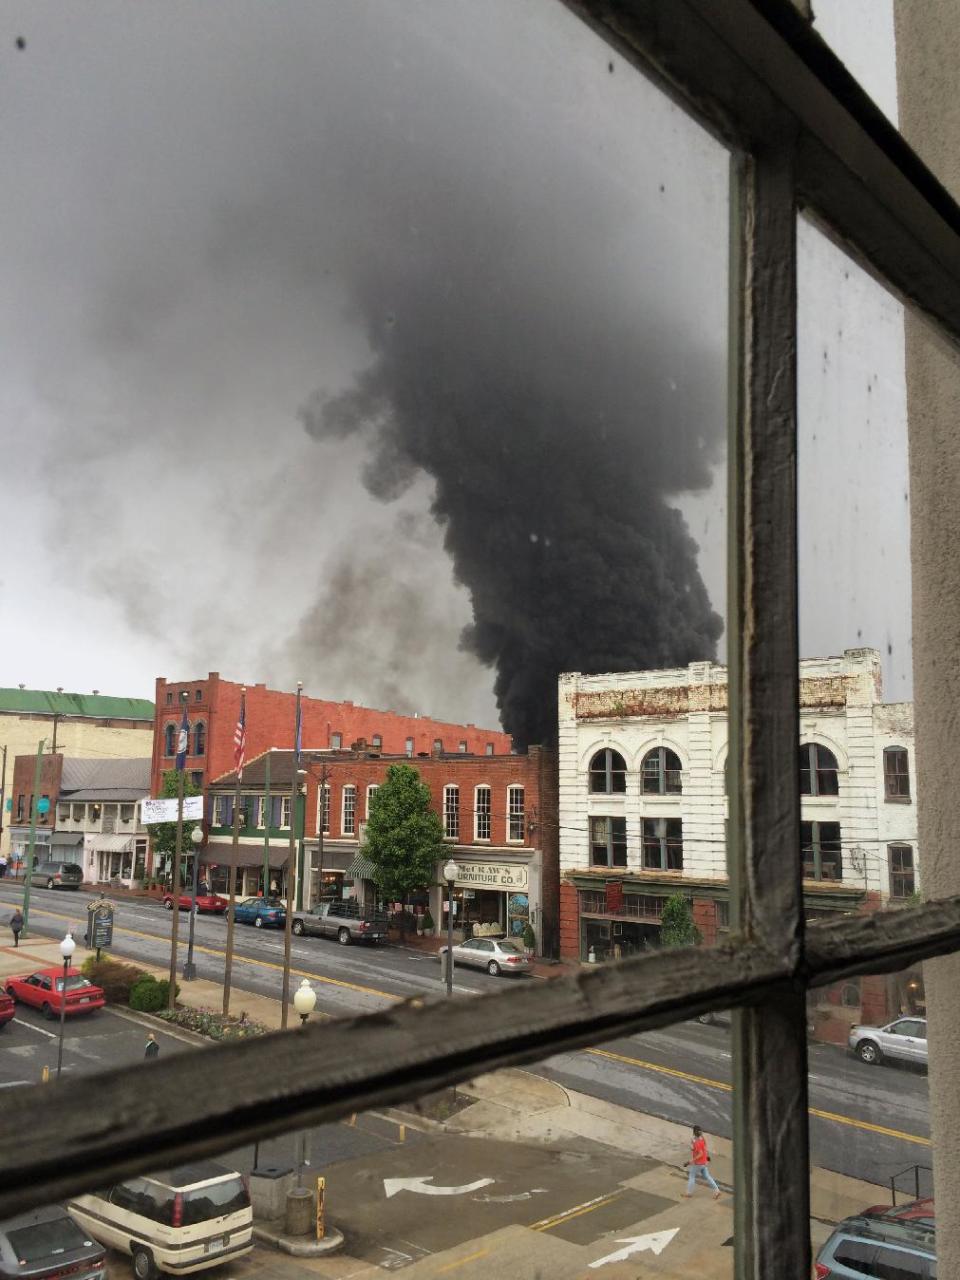 In this mobile phone photo provided Charles Peters, smoke rises after several CSX tanker cars carrying crude oil derailed on Wednesday, April 30, 2014, in Lynchburg, Va. Authorities evacuated numerous buildings Wednesday after the derailment. (AP Photo/Charles Peters) MANDATORY CREDIT